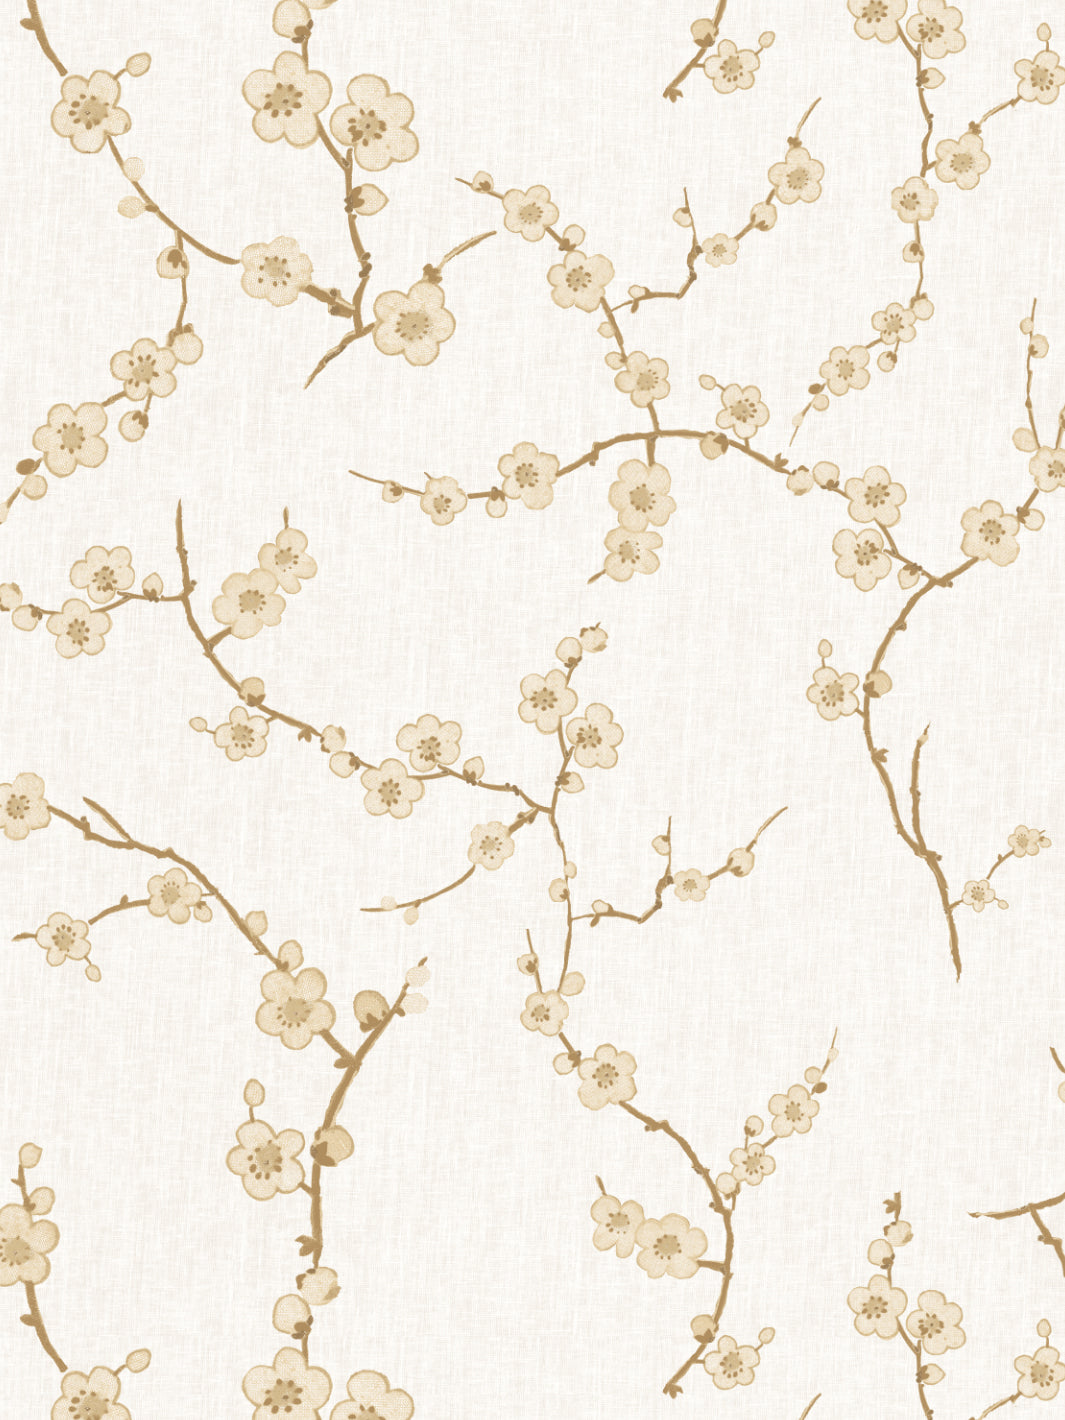 &#39;Cherry Blossom&#39; Wallpaper by Nathan Turner - Gold